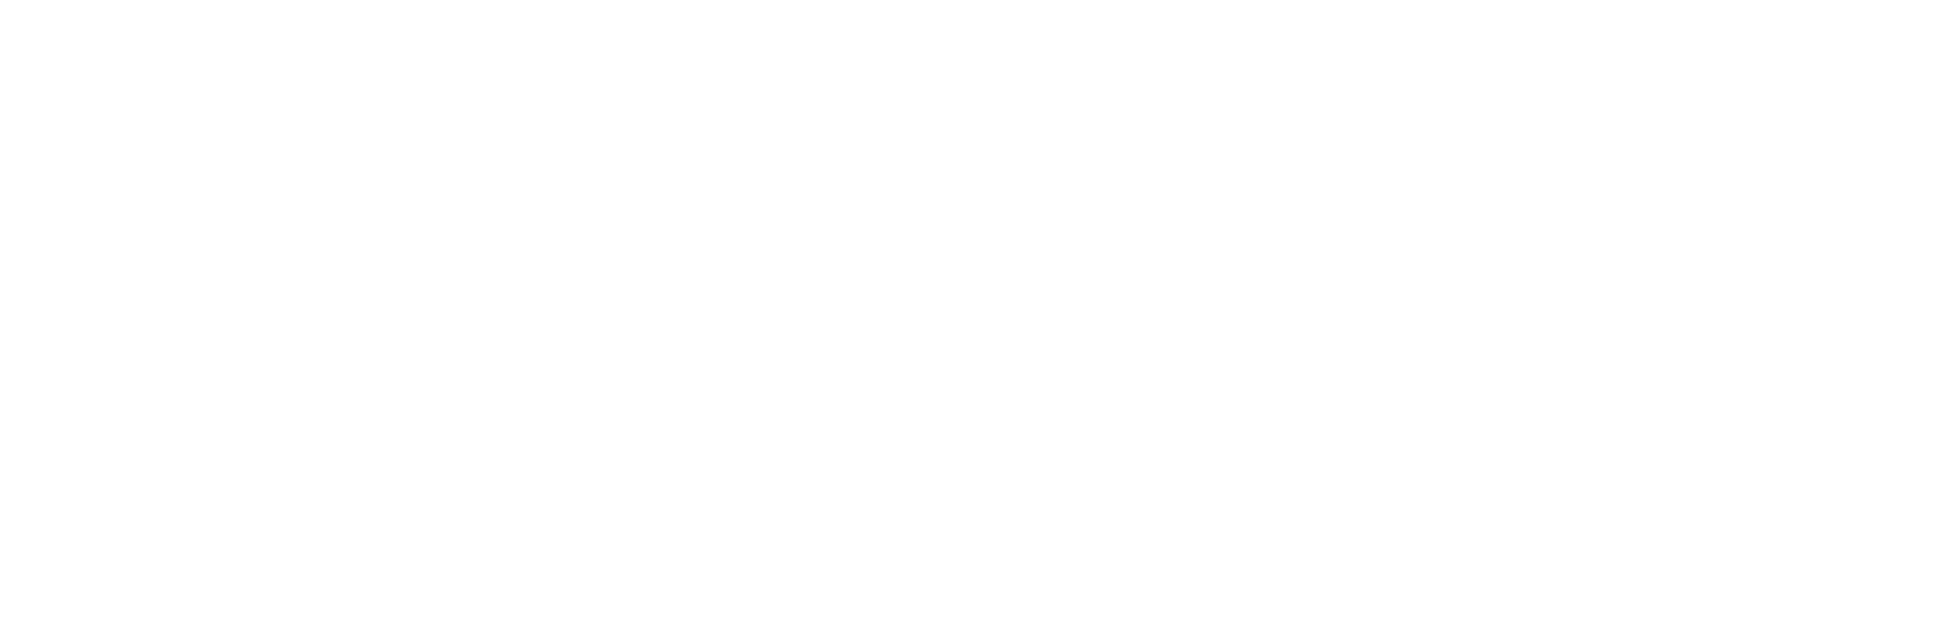 Impact of the Harvest for Health grant